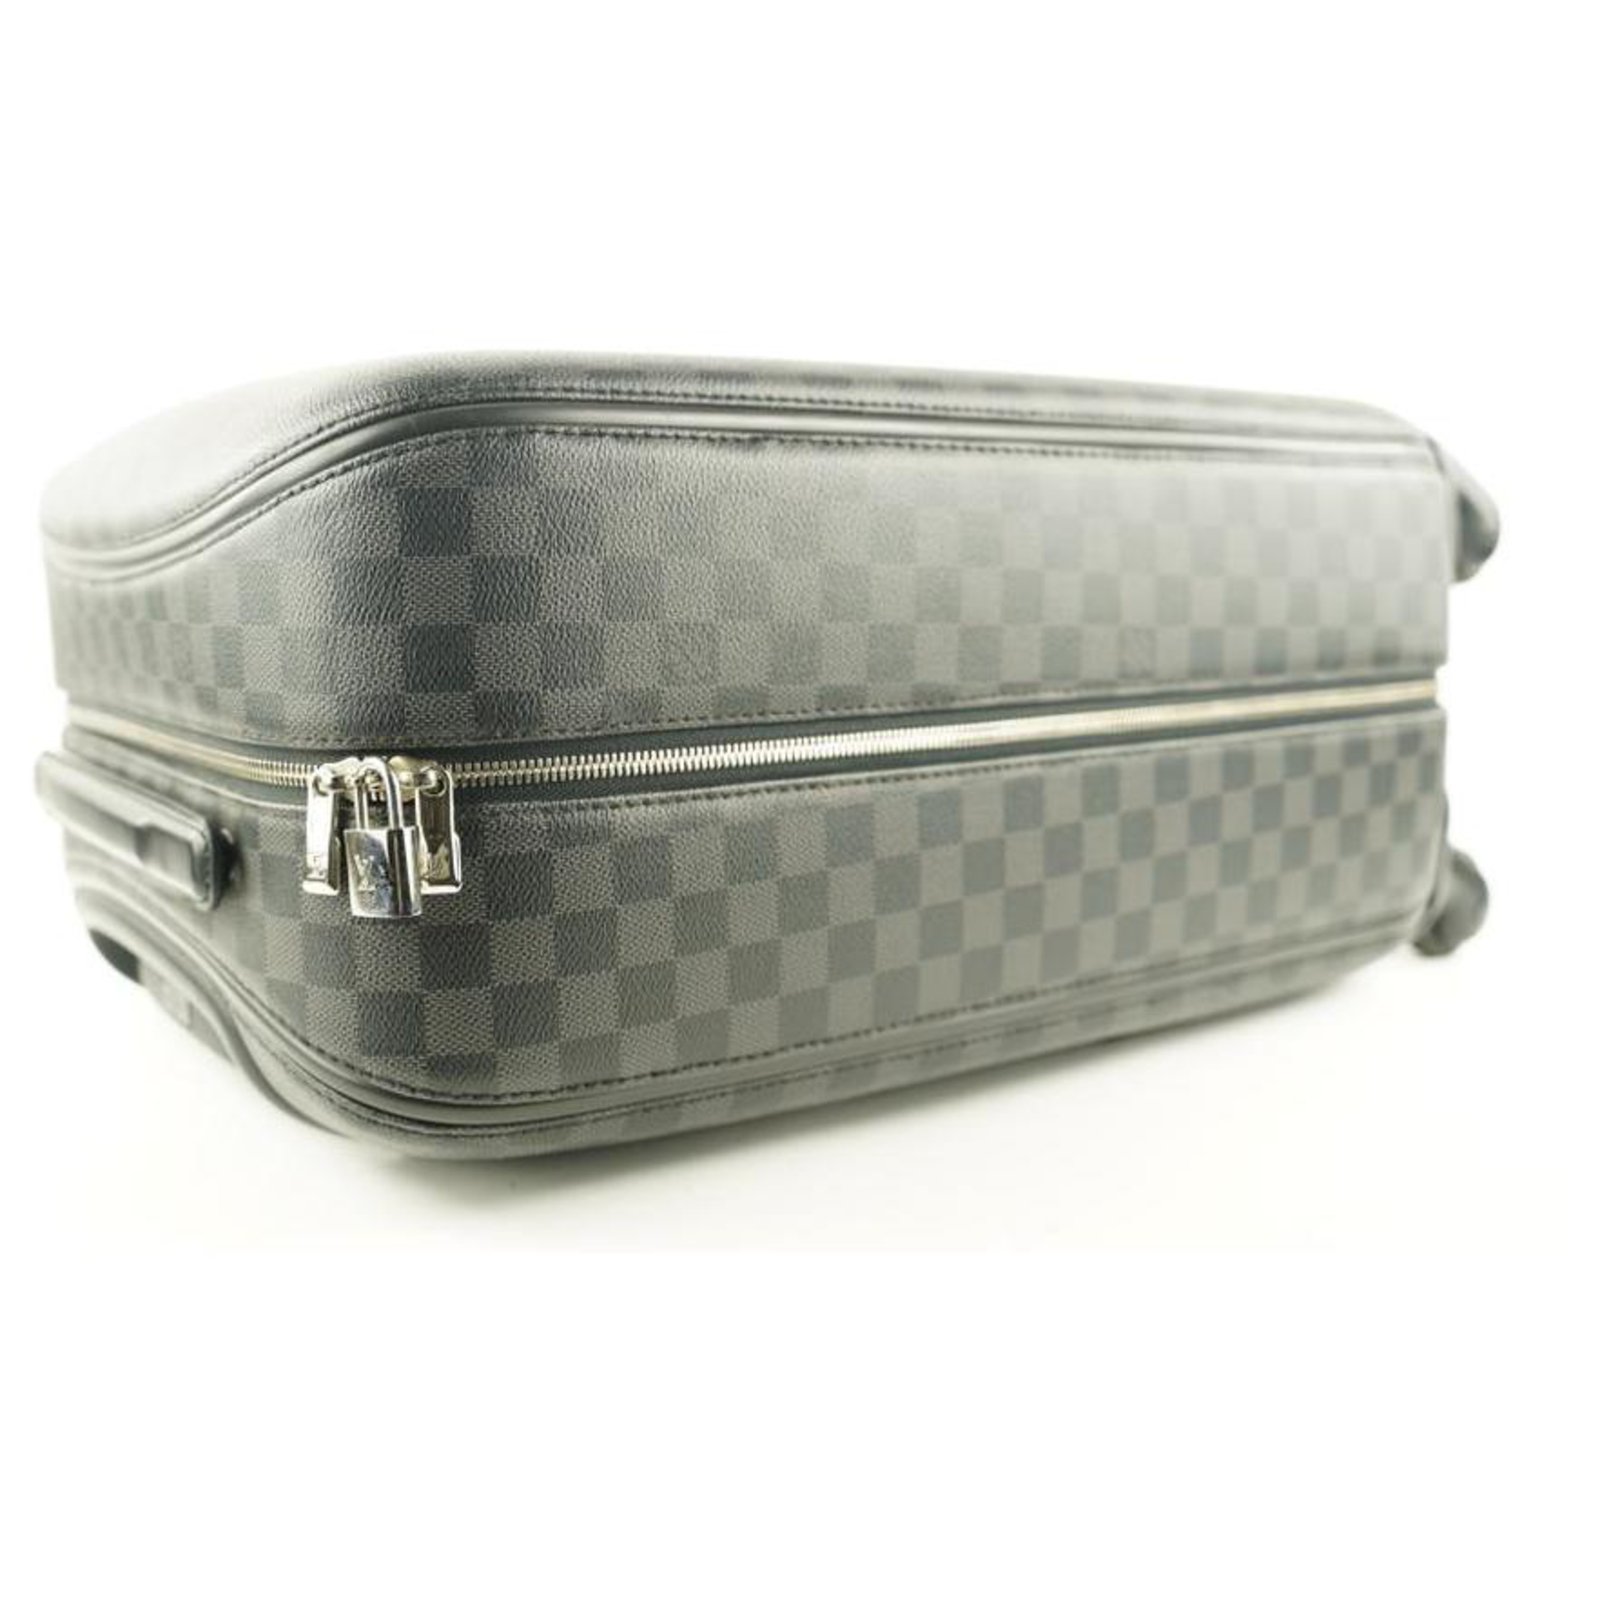 Louis Vuitton Damier Cobalt Zephyr Rolling Luggage Trolley Suitcase  26lz531s For Sale at 1stDibs